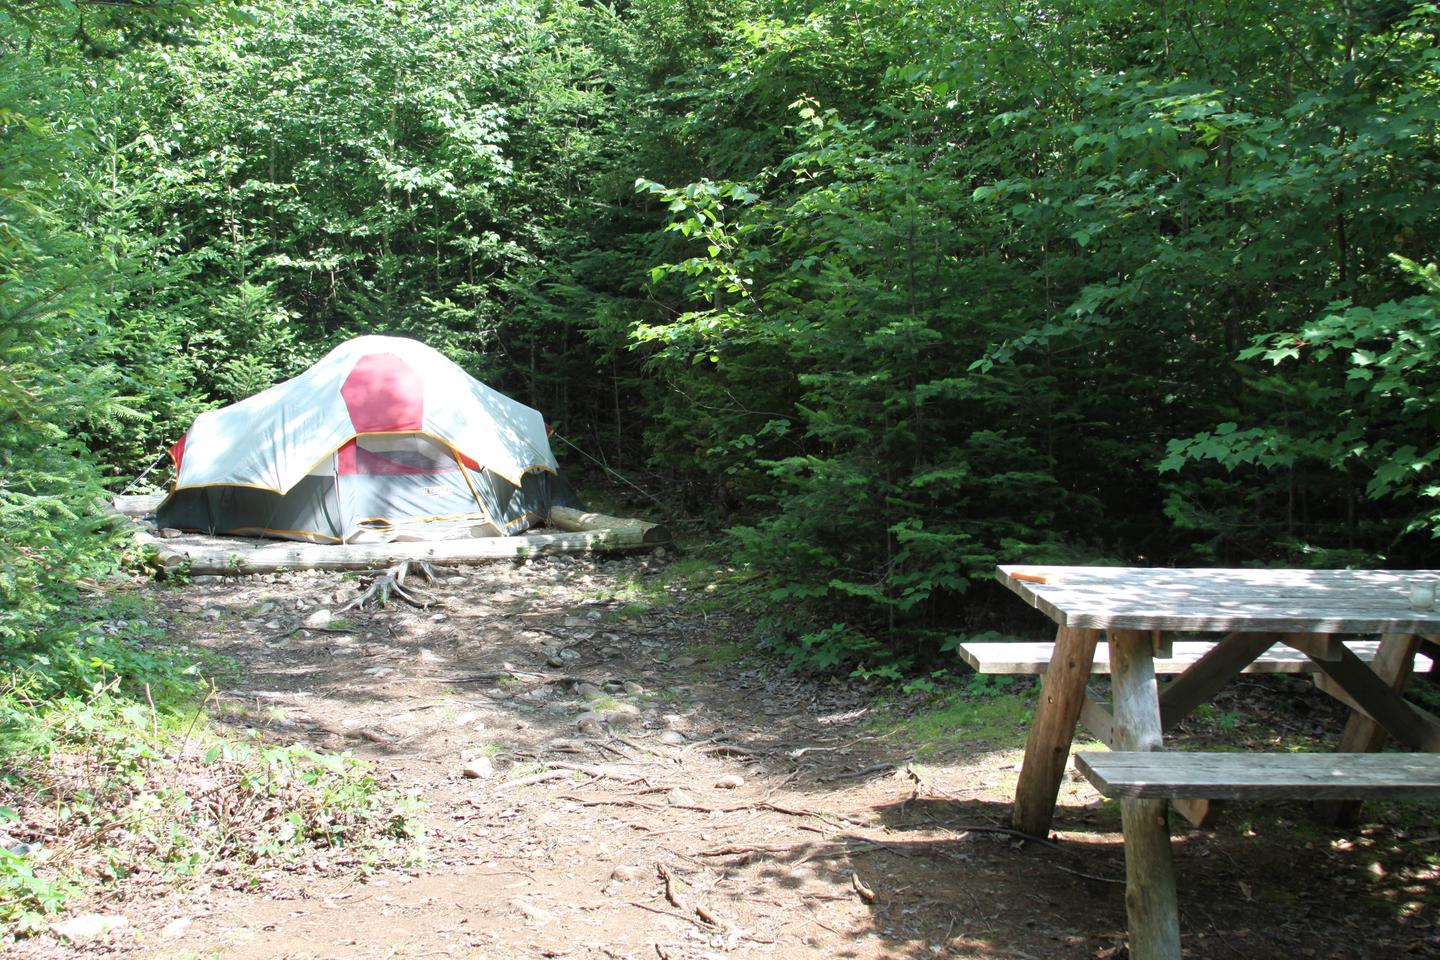 A Photo of Site H3 While OccupiedSite H3